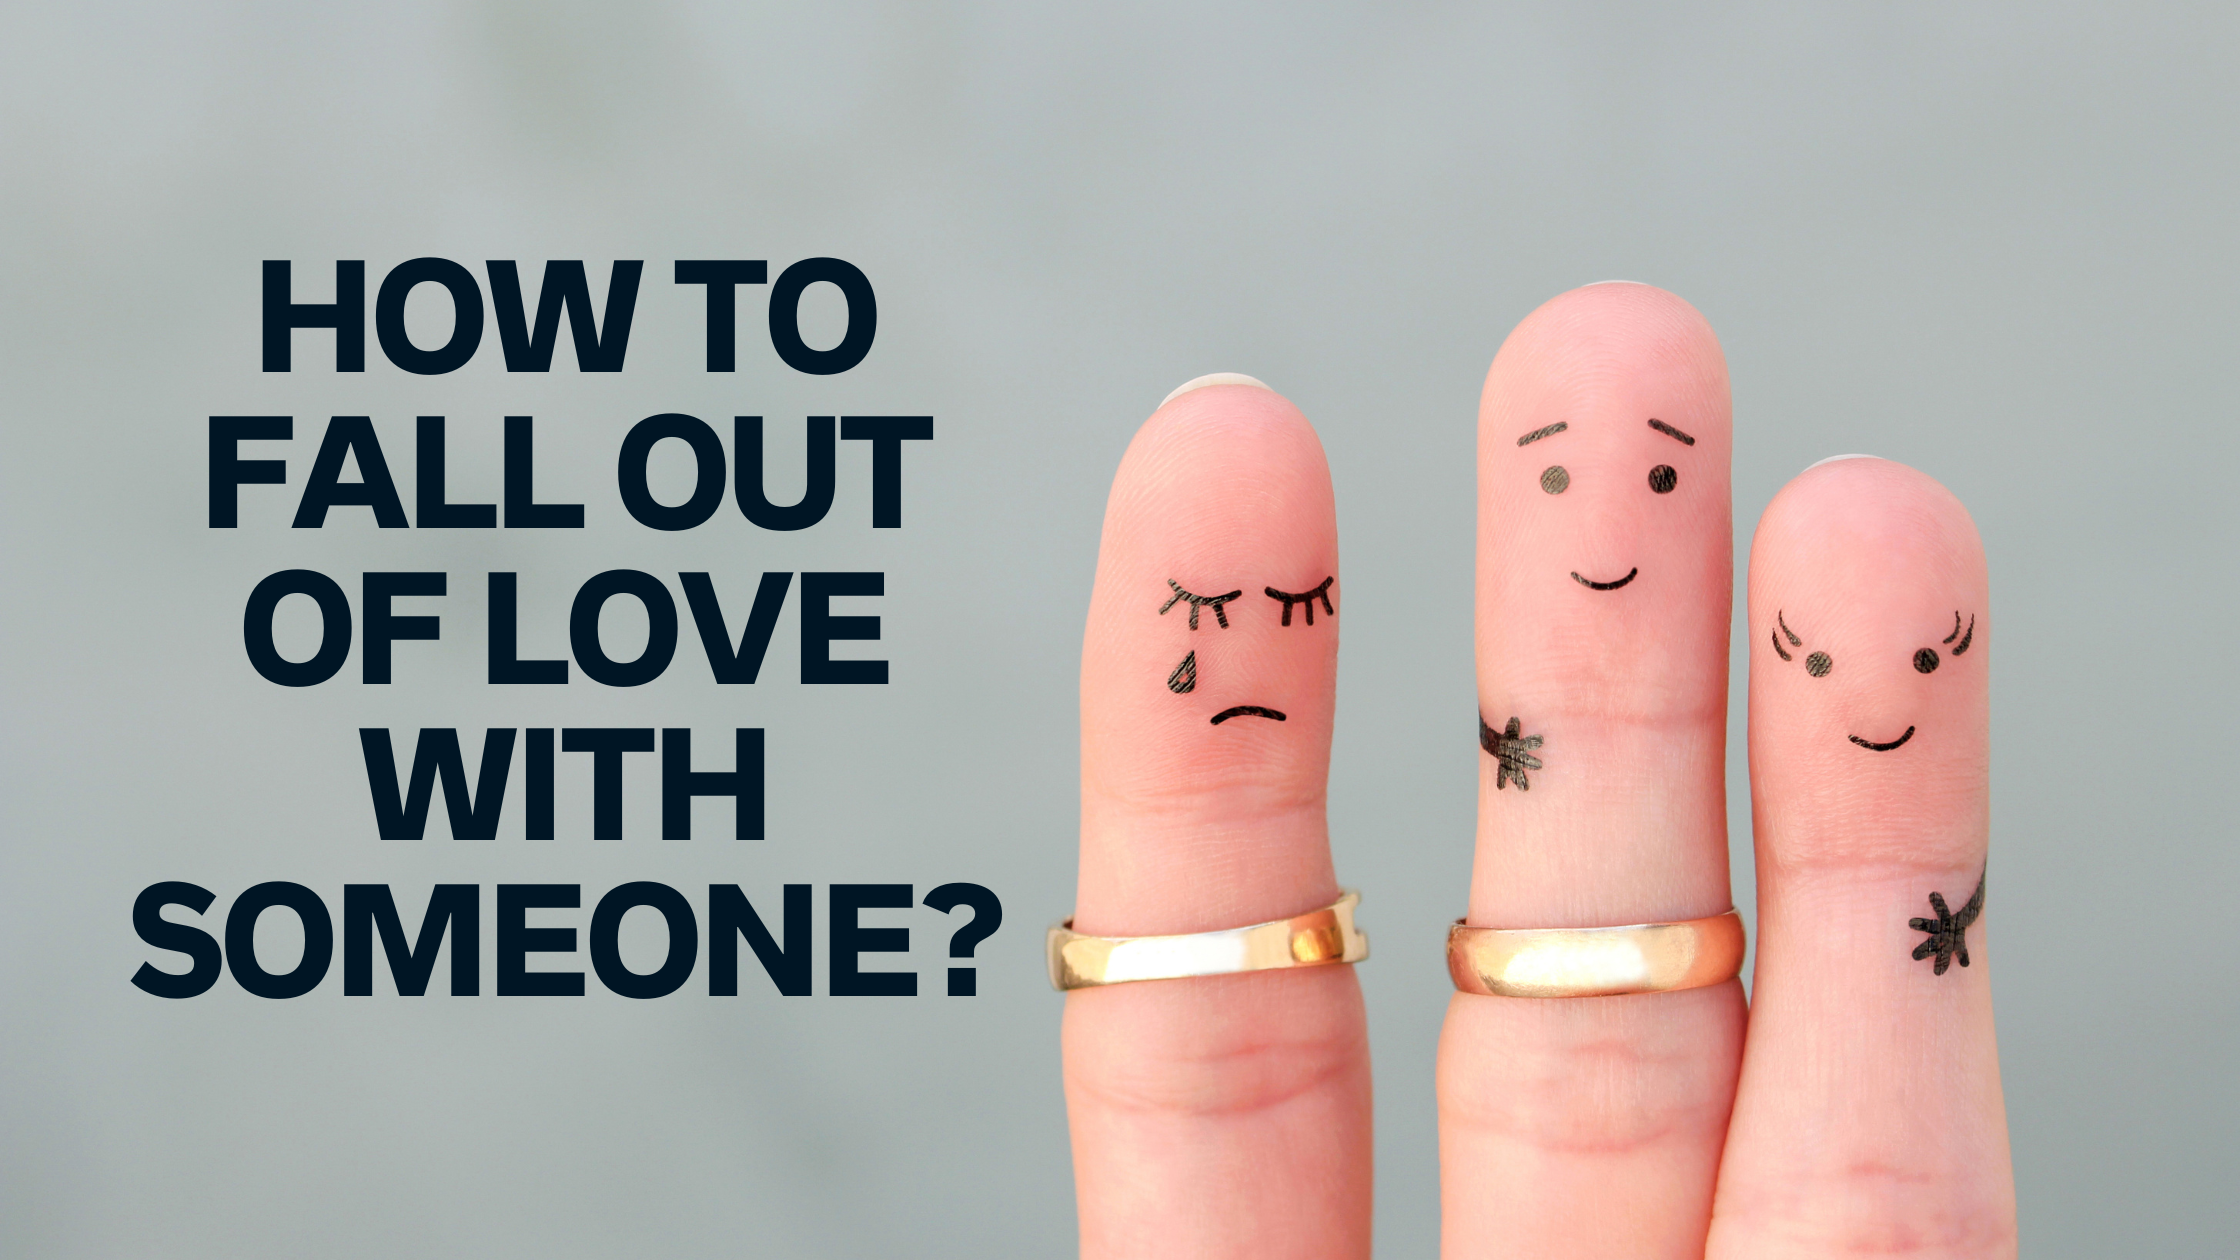 How to Fall Out of Love with Someone